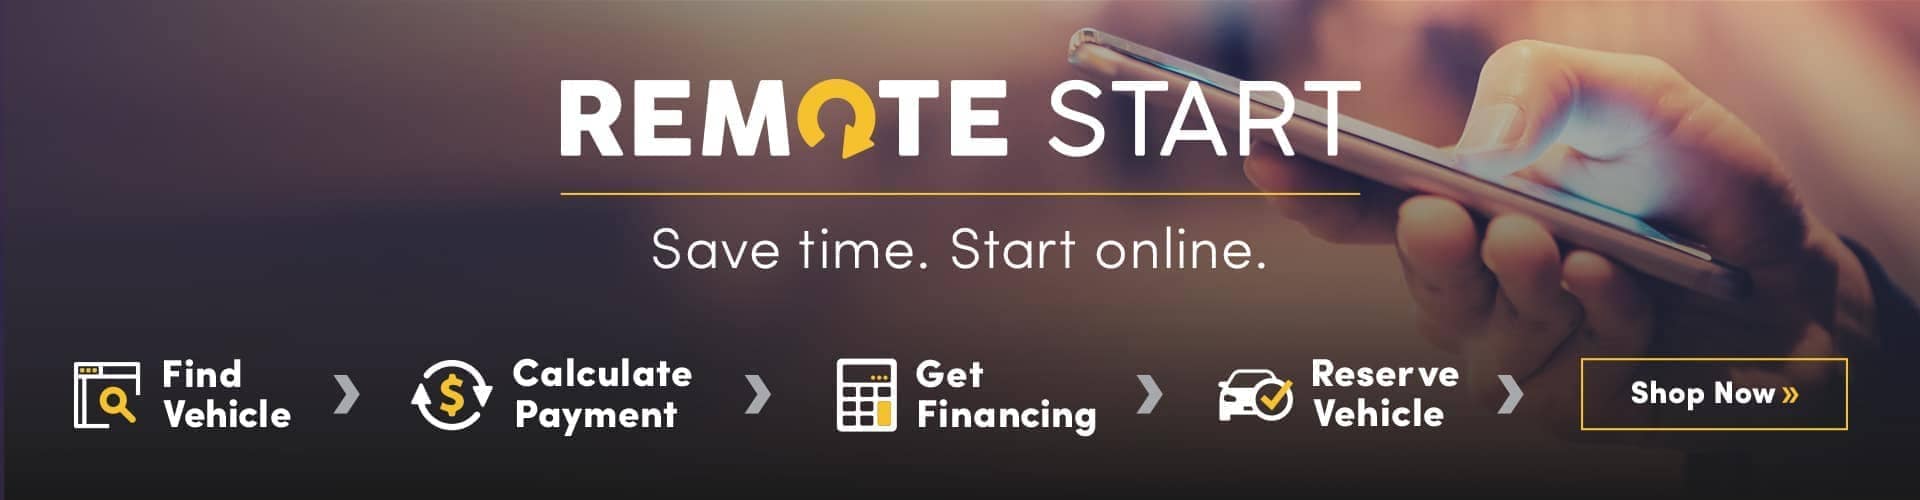 Remote Start: Save Time. Start Online. Find vehicle. Calculate payment. Get financing. Reserve vehicle